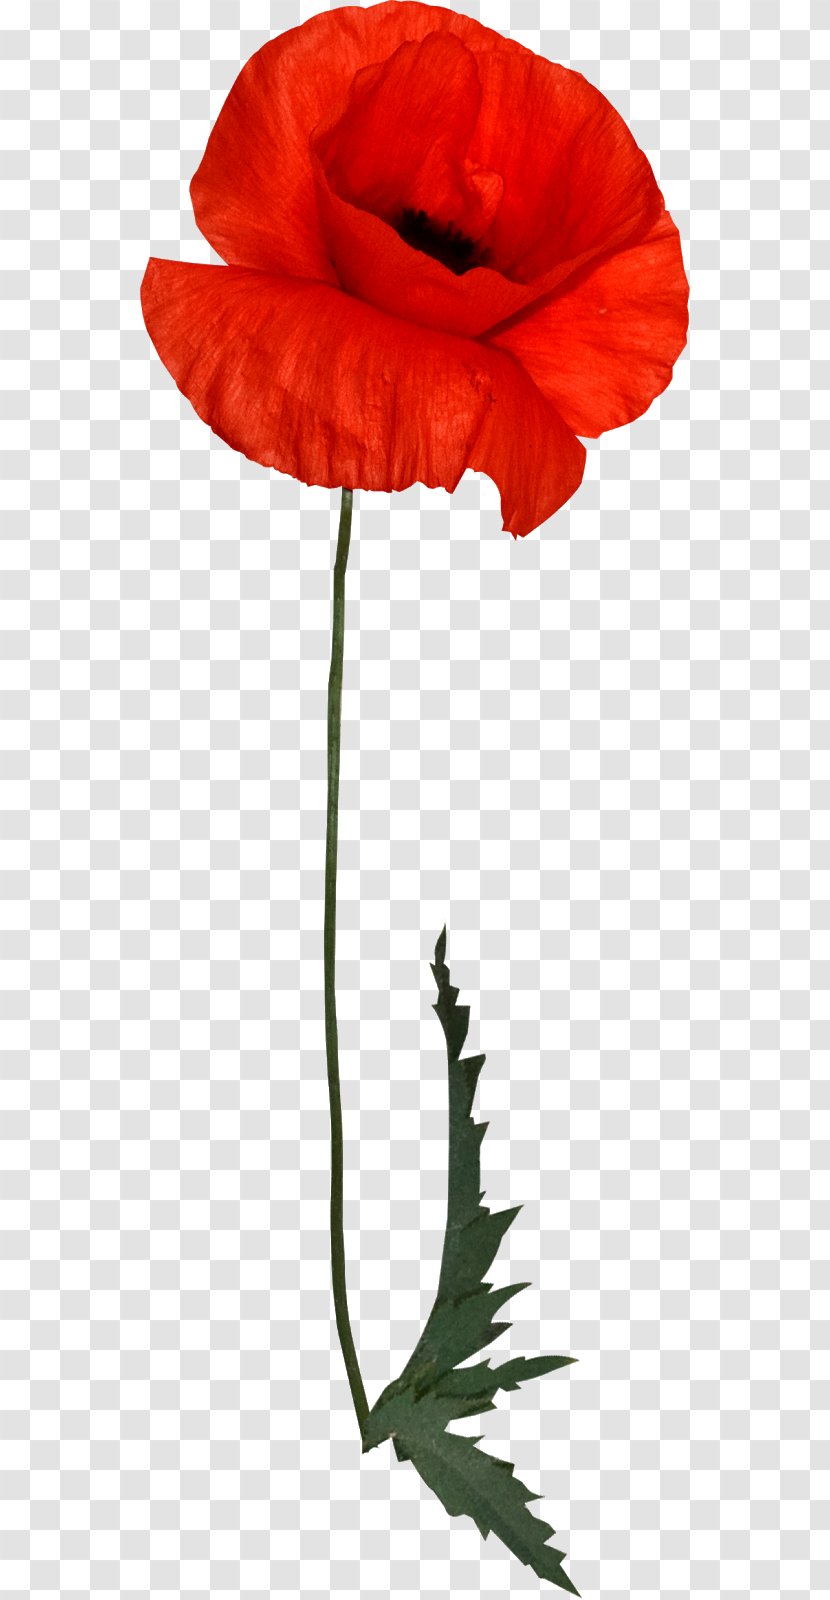 Common Poppy Image Clip Art - Red Transparent PNG